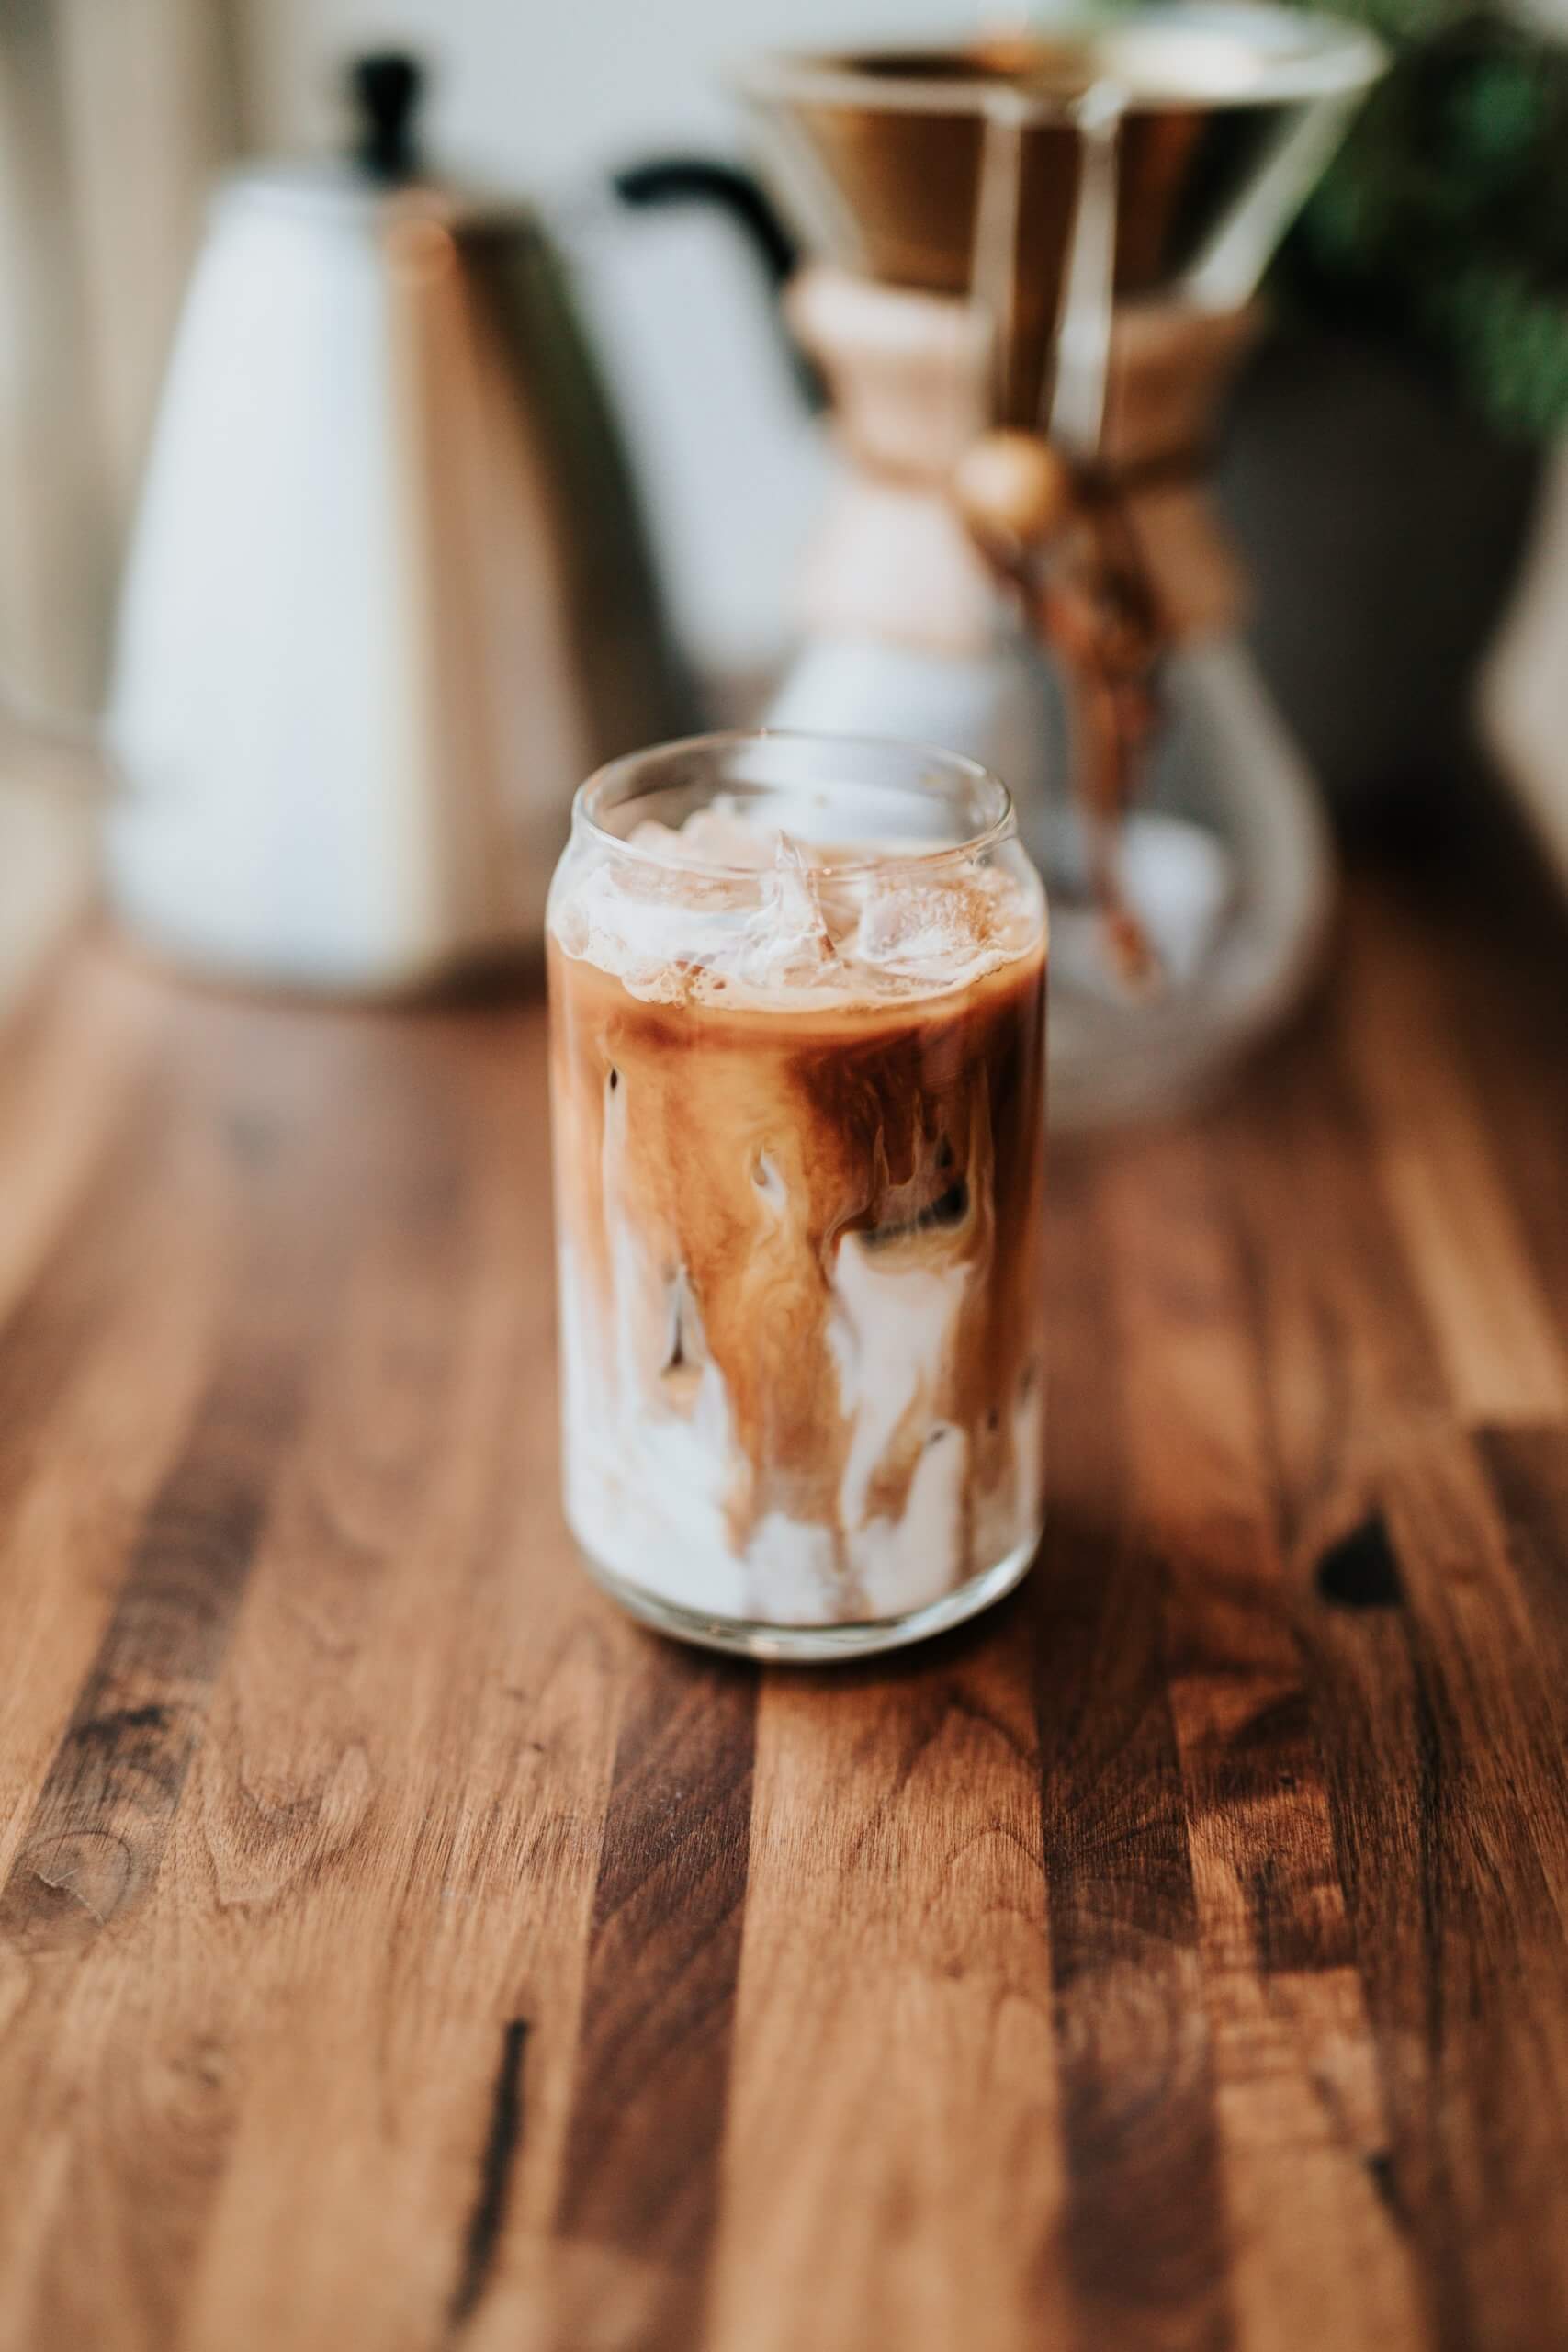 How to Make an Iced Caramel Macchiato at Home